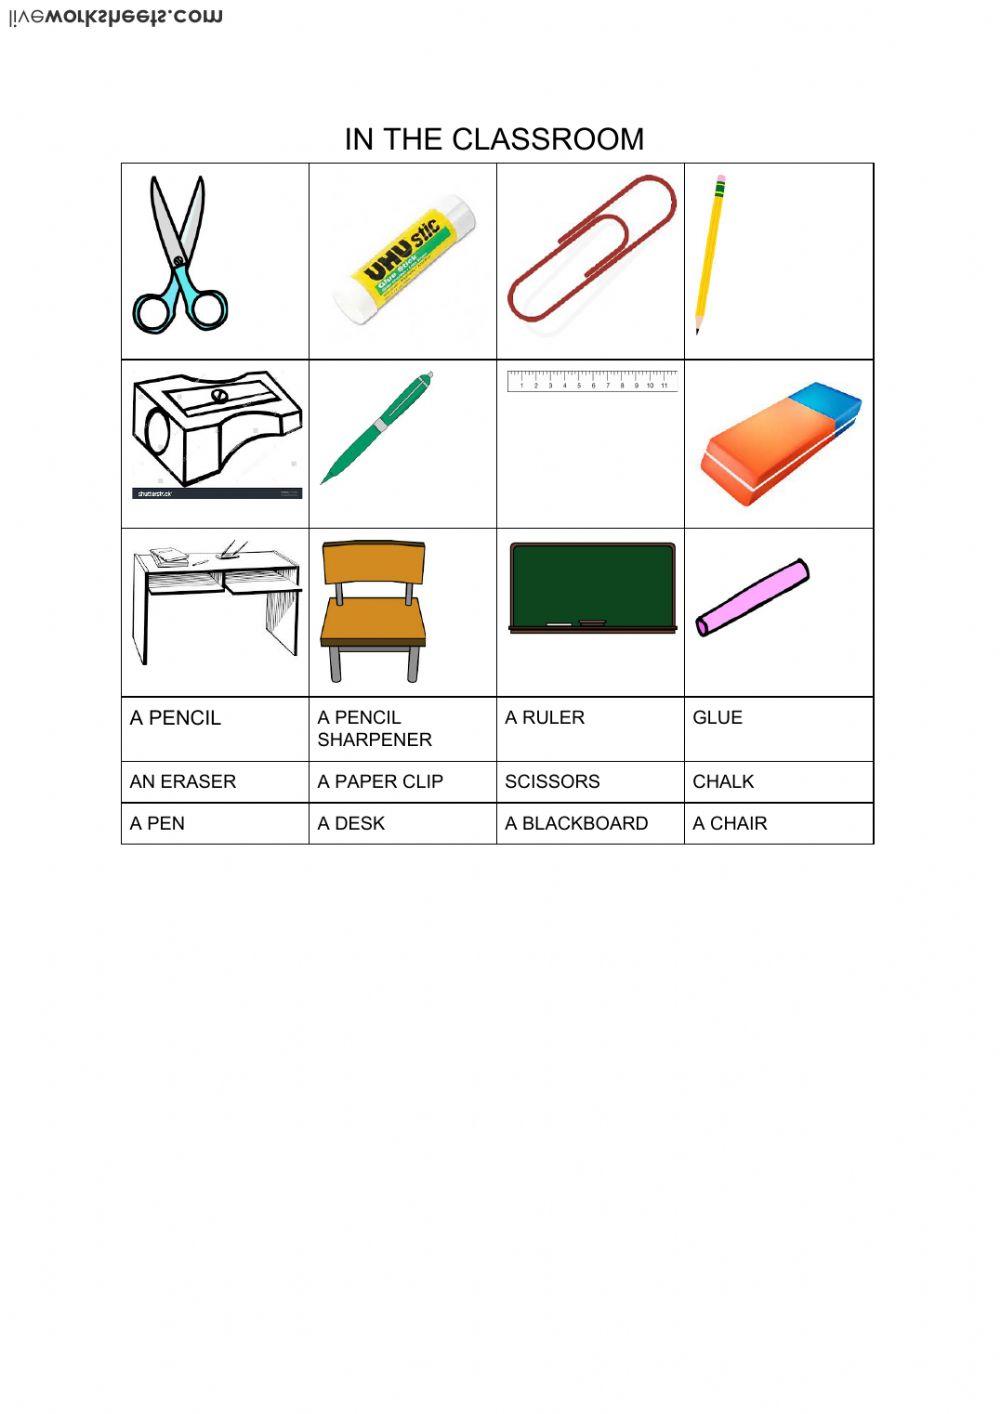 objects in the classroom